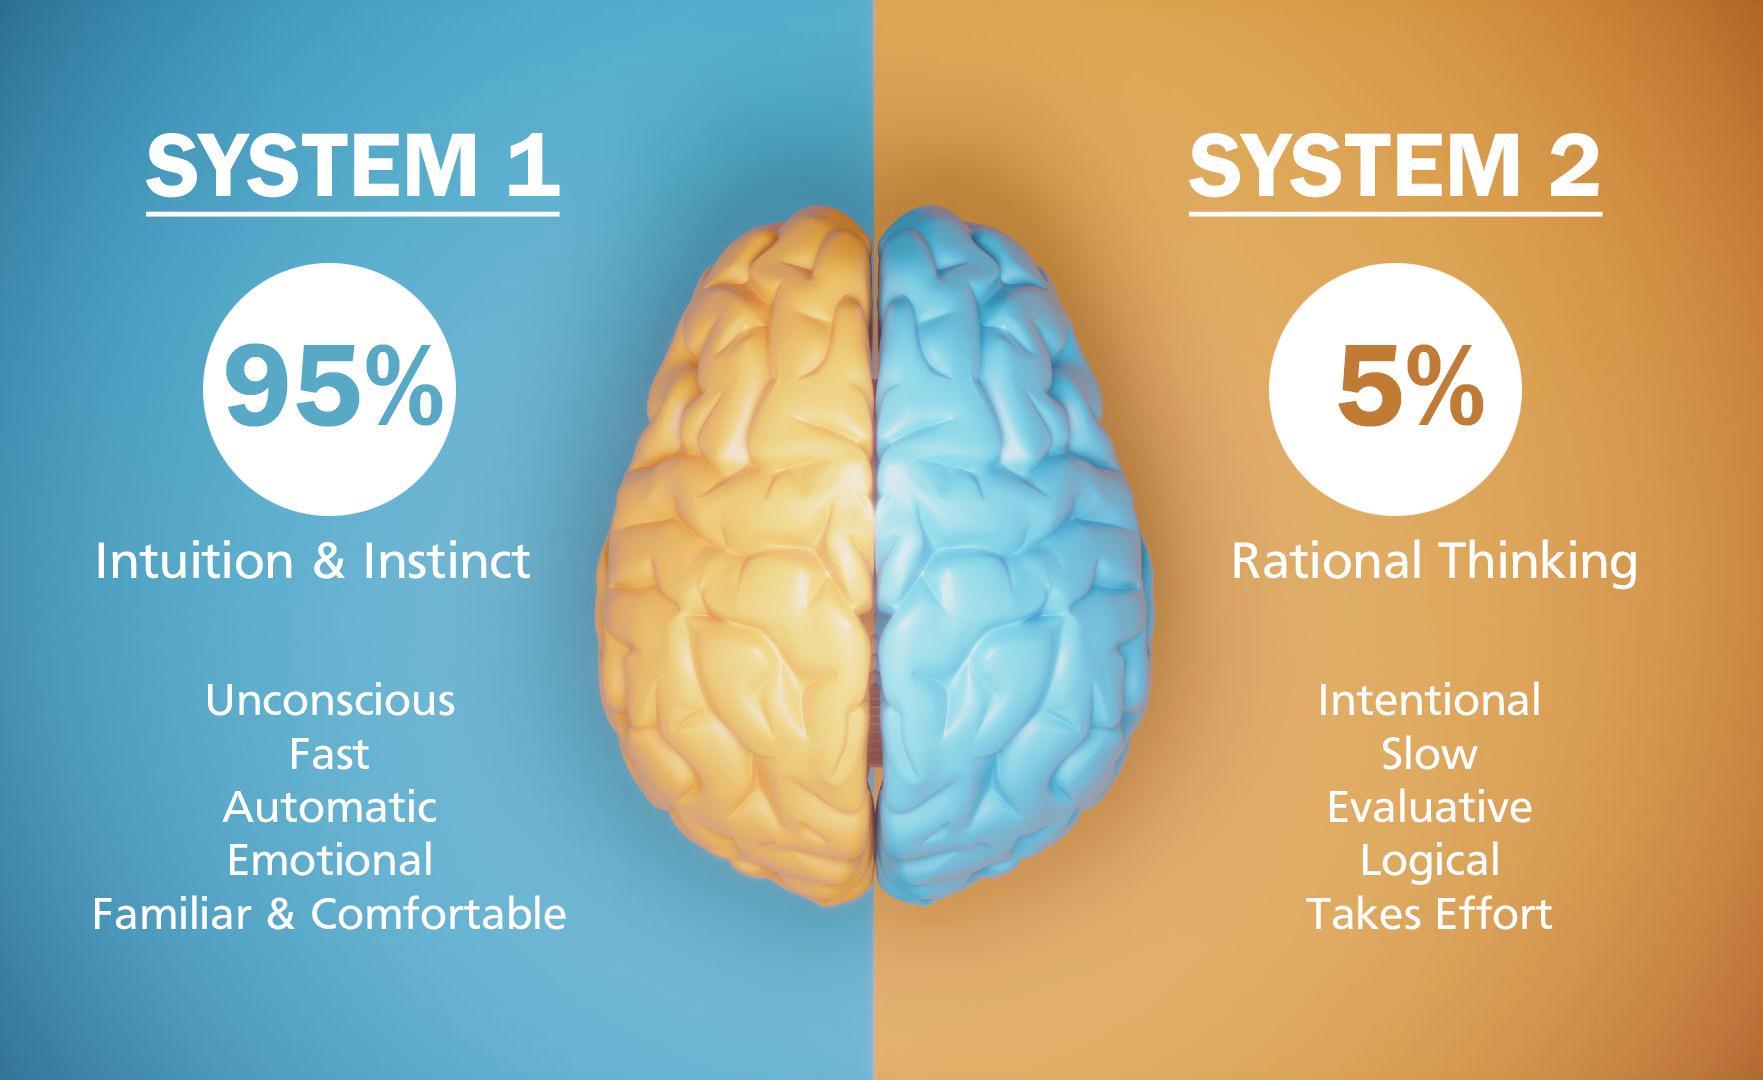 System 1 and System 2 thinking illustration distinguishing the two types of thinking